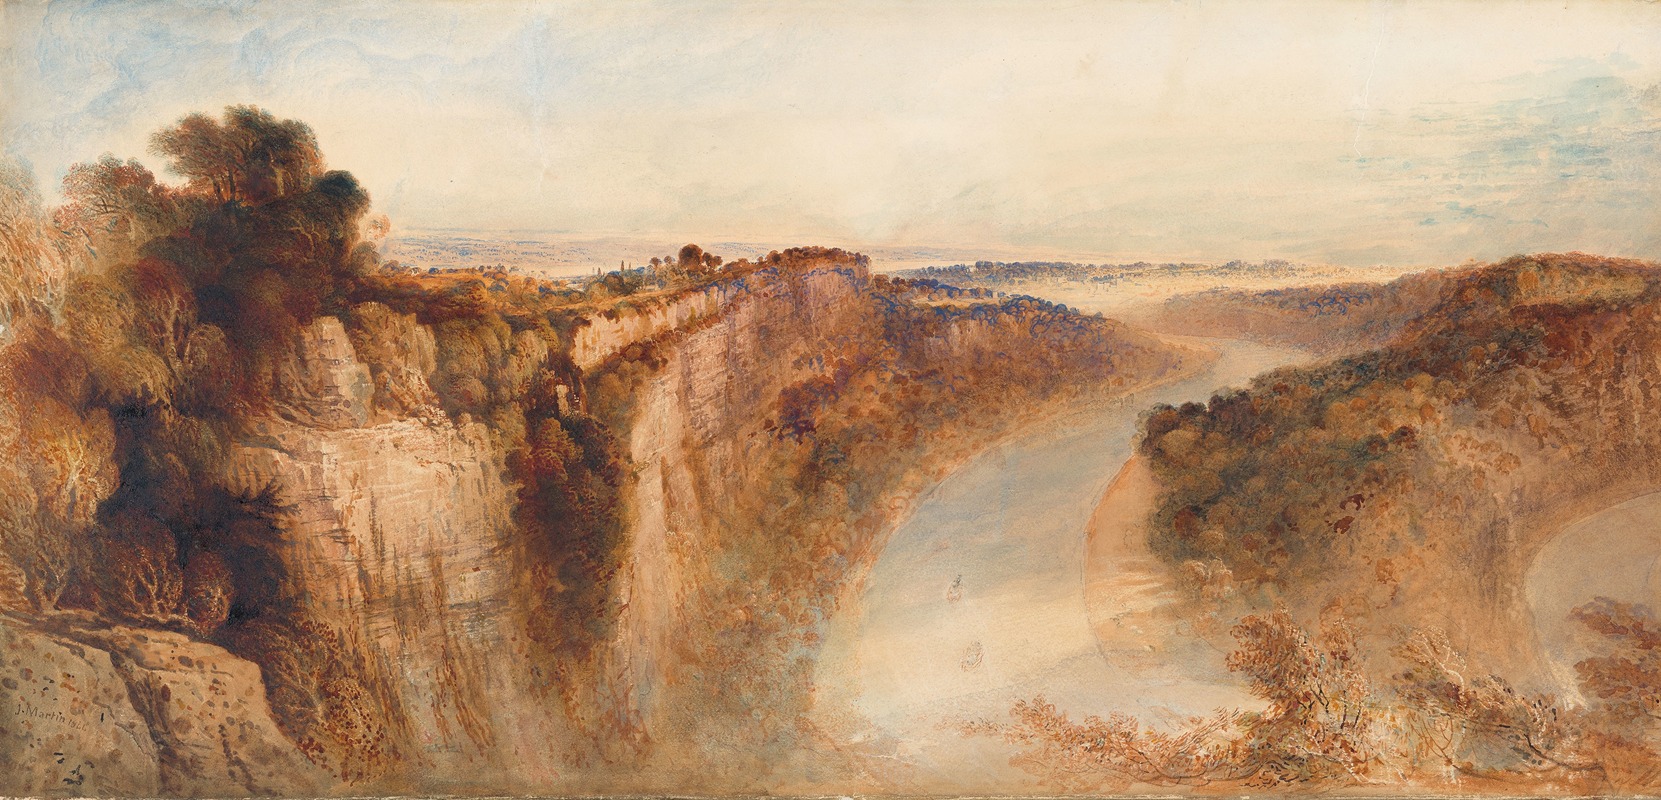 John Martin - View on the River Wye, Looking towards Chepstow